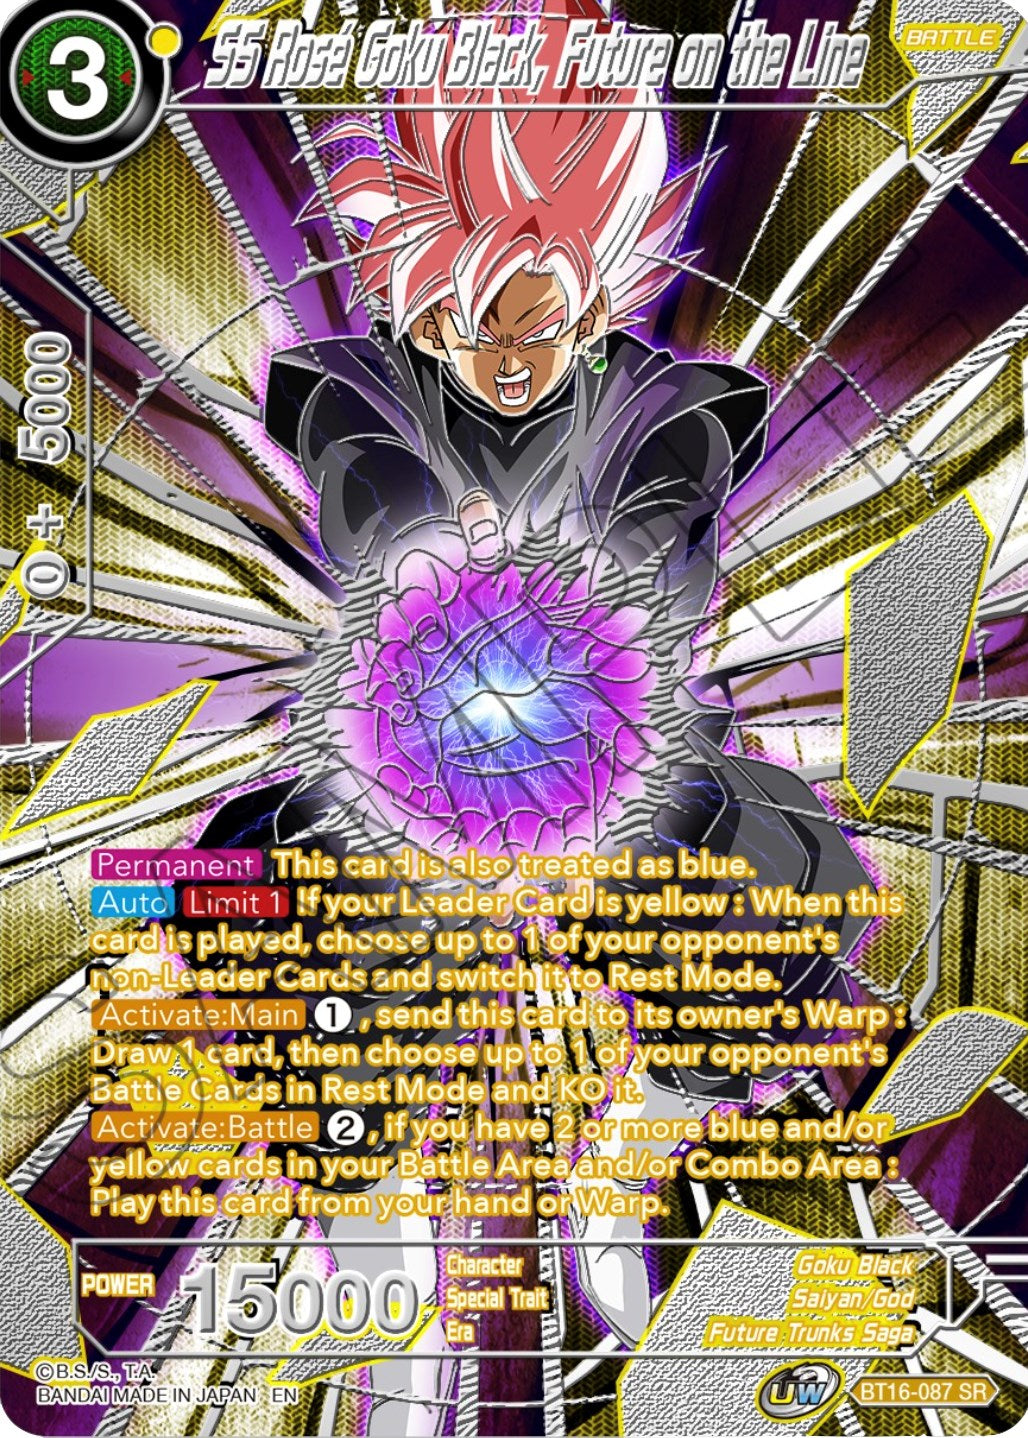 SS Rose Goku Black, Future on the Line (BT16-087) [Collector's Selection Vol. 3] | North Valley Games